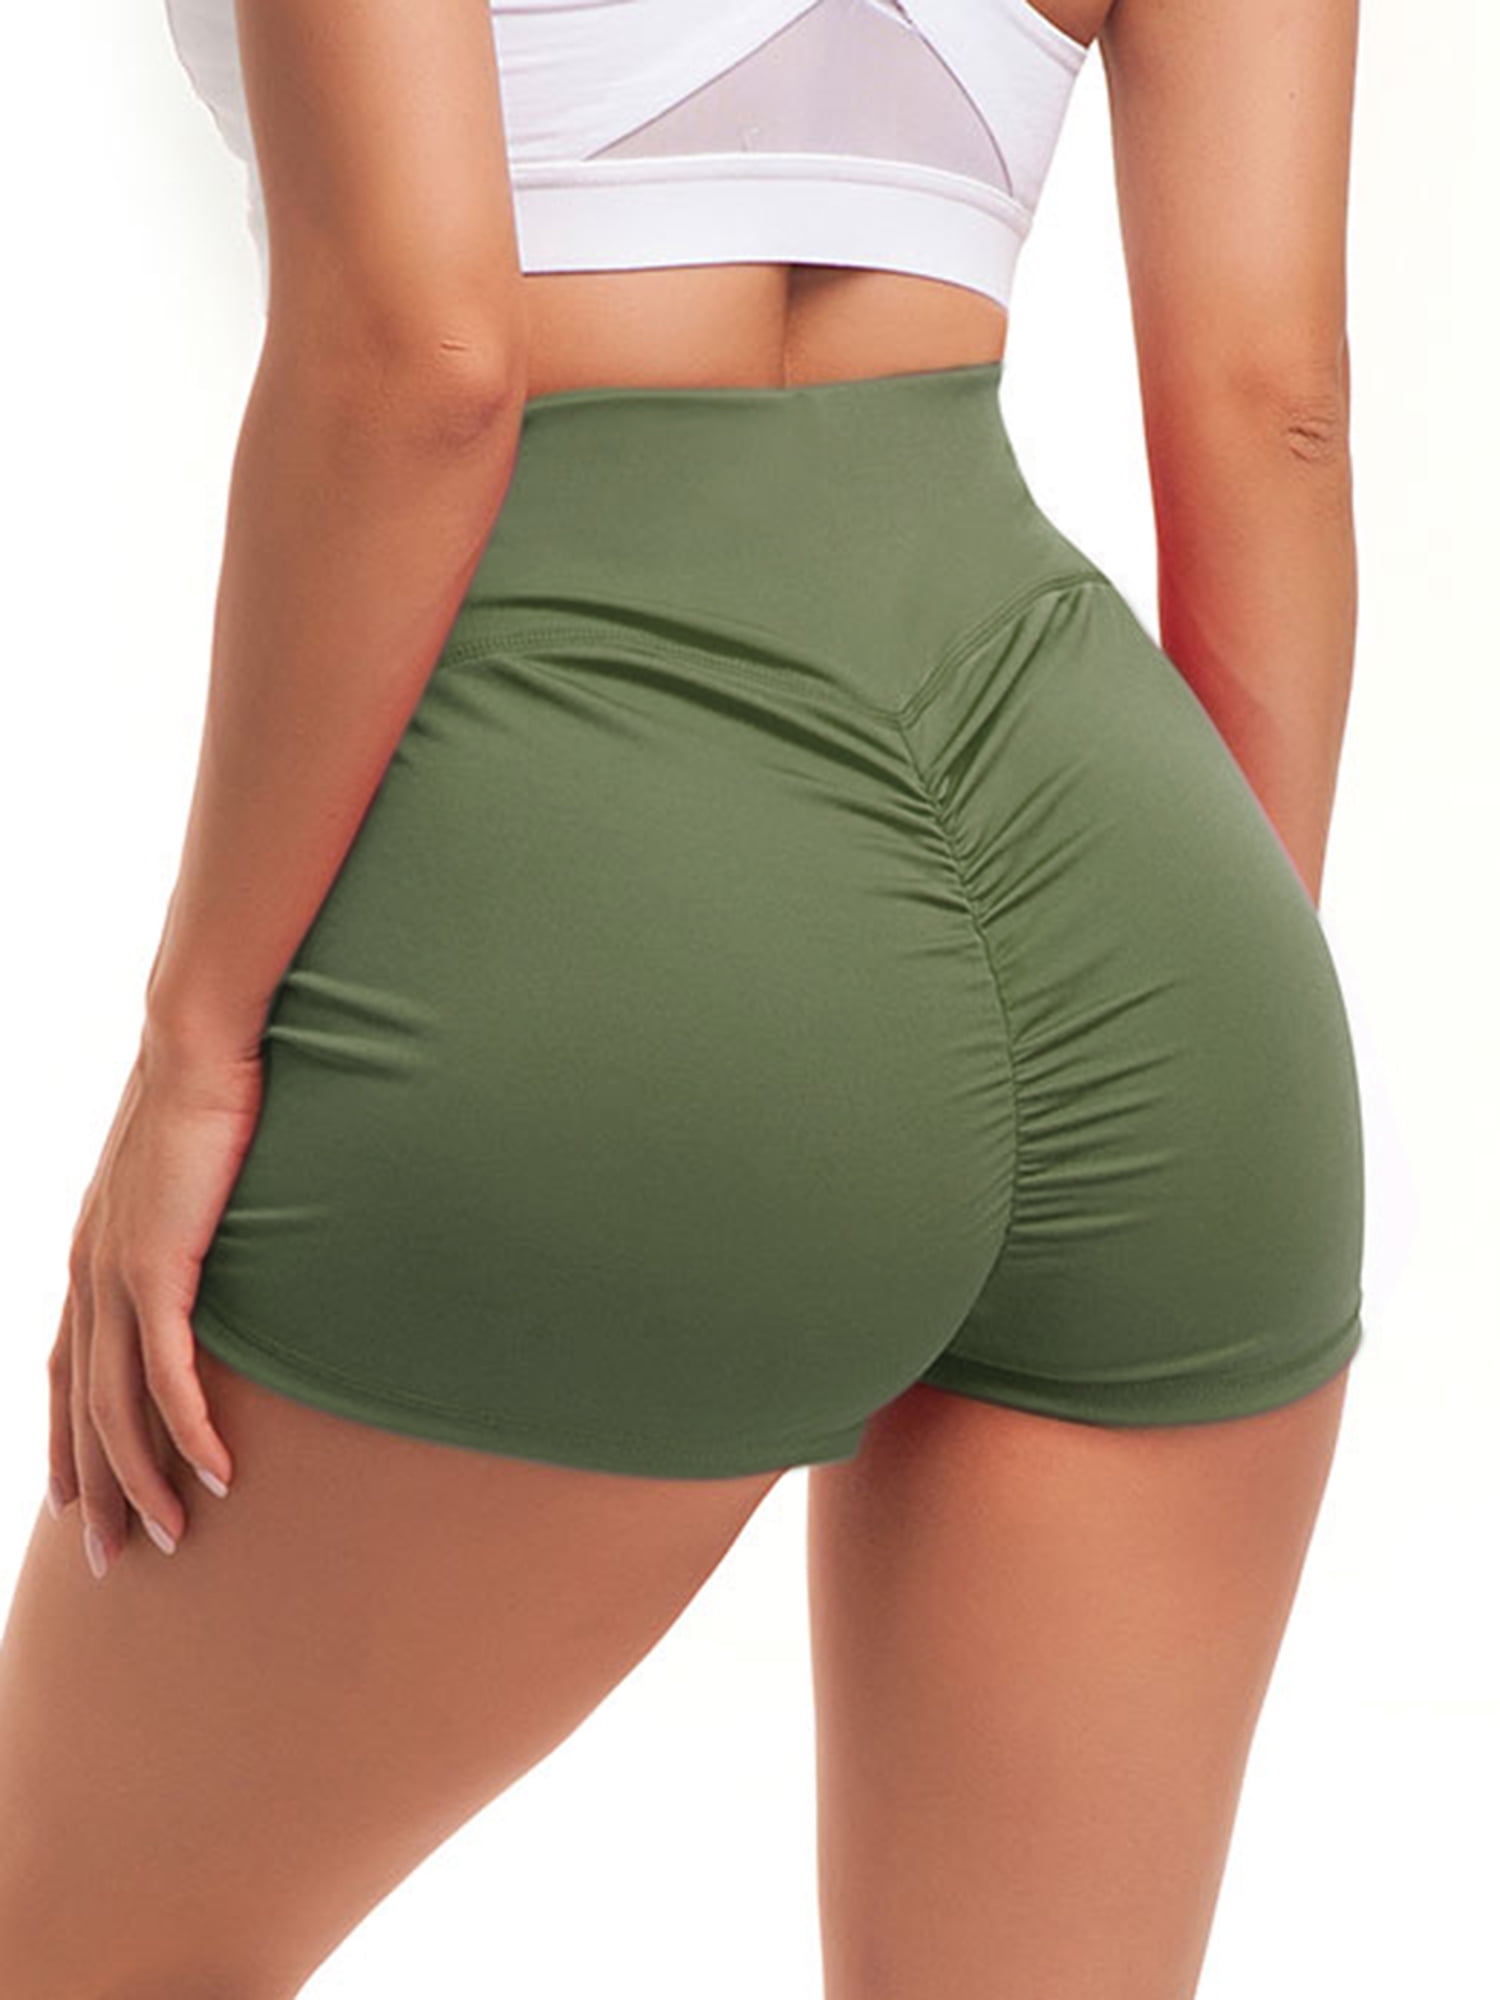 Yoga Shorts for Women,High Waisted Solid Booty Shorts Button Pockets Hot Pants